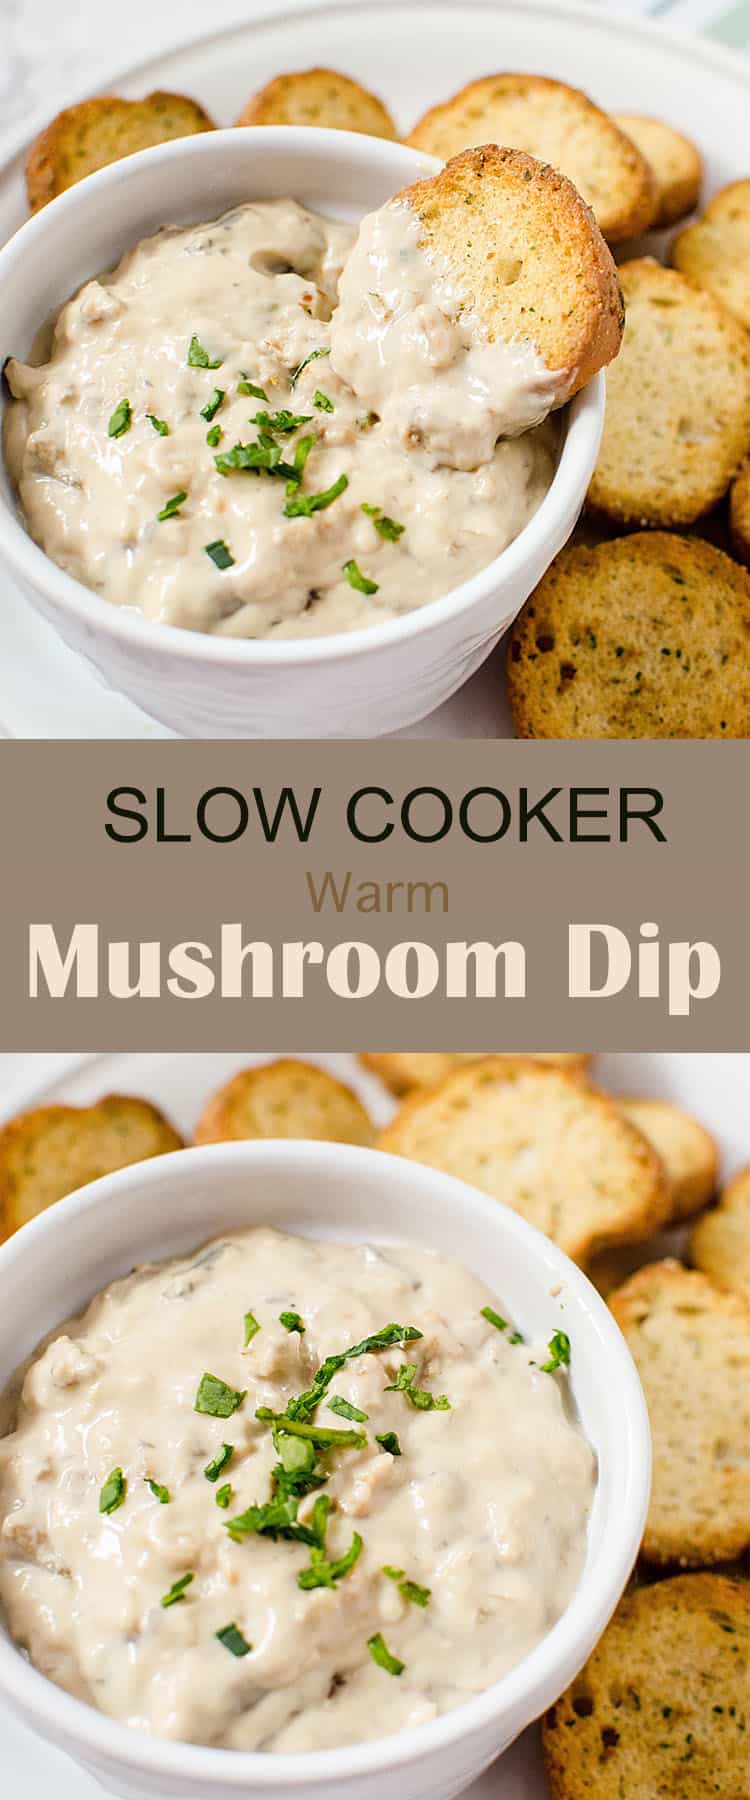 A bowl filled with different types of food on a plate, with Mushroom dip